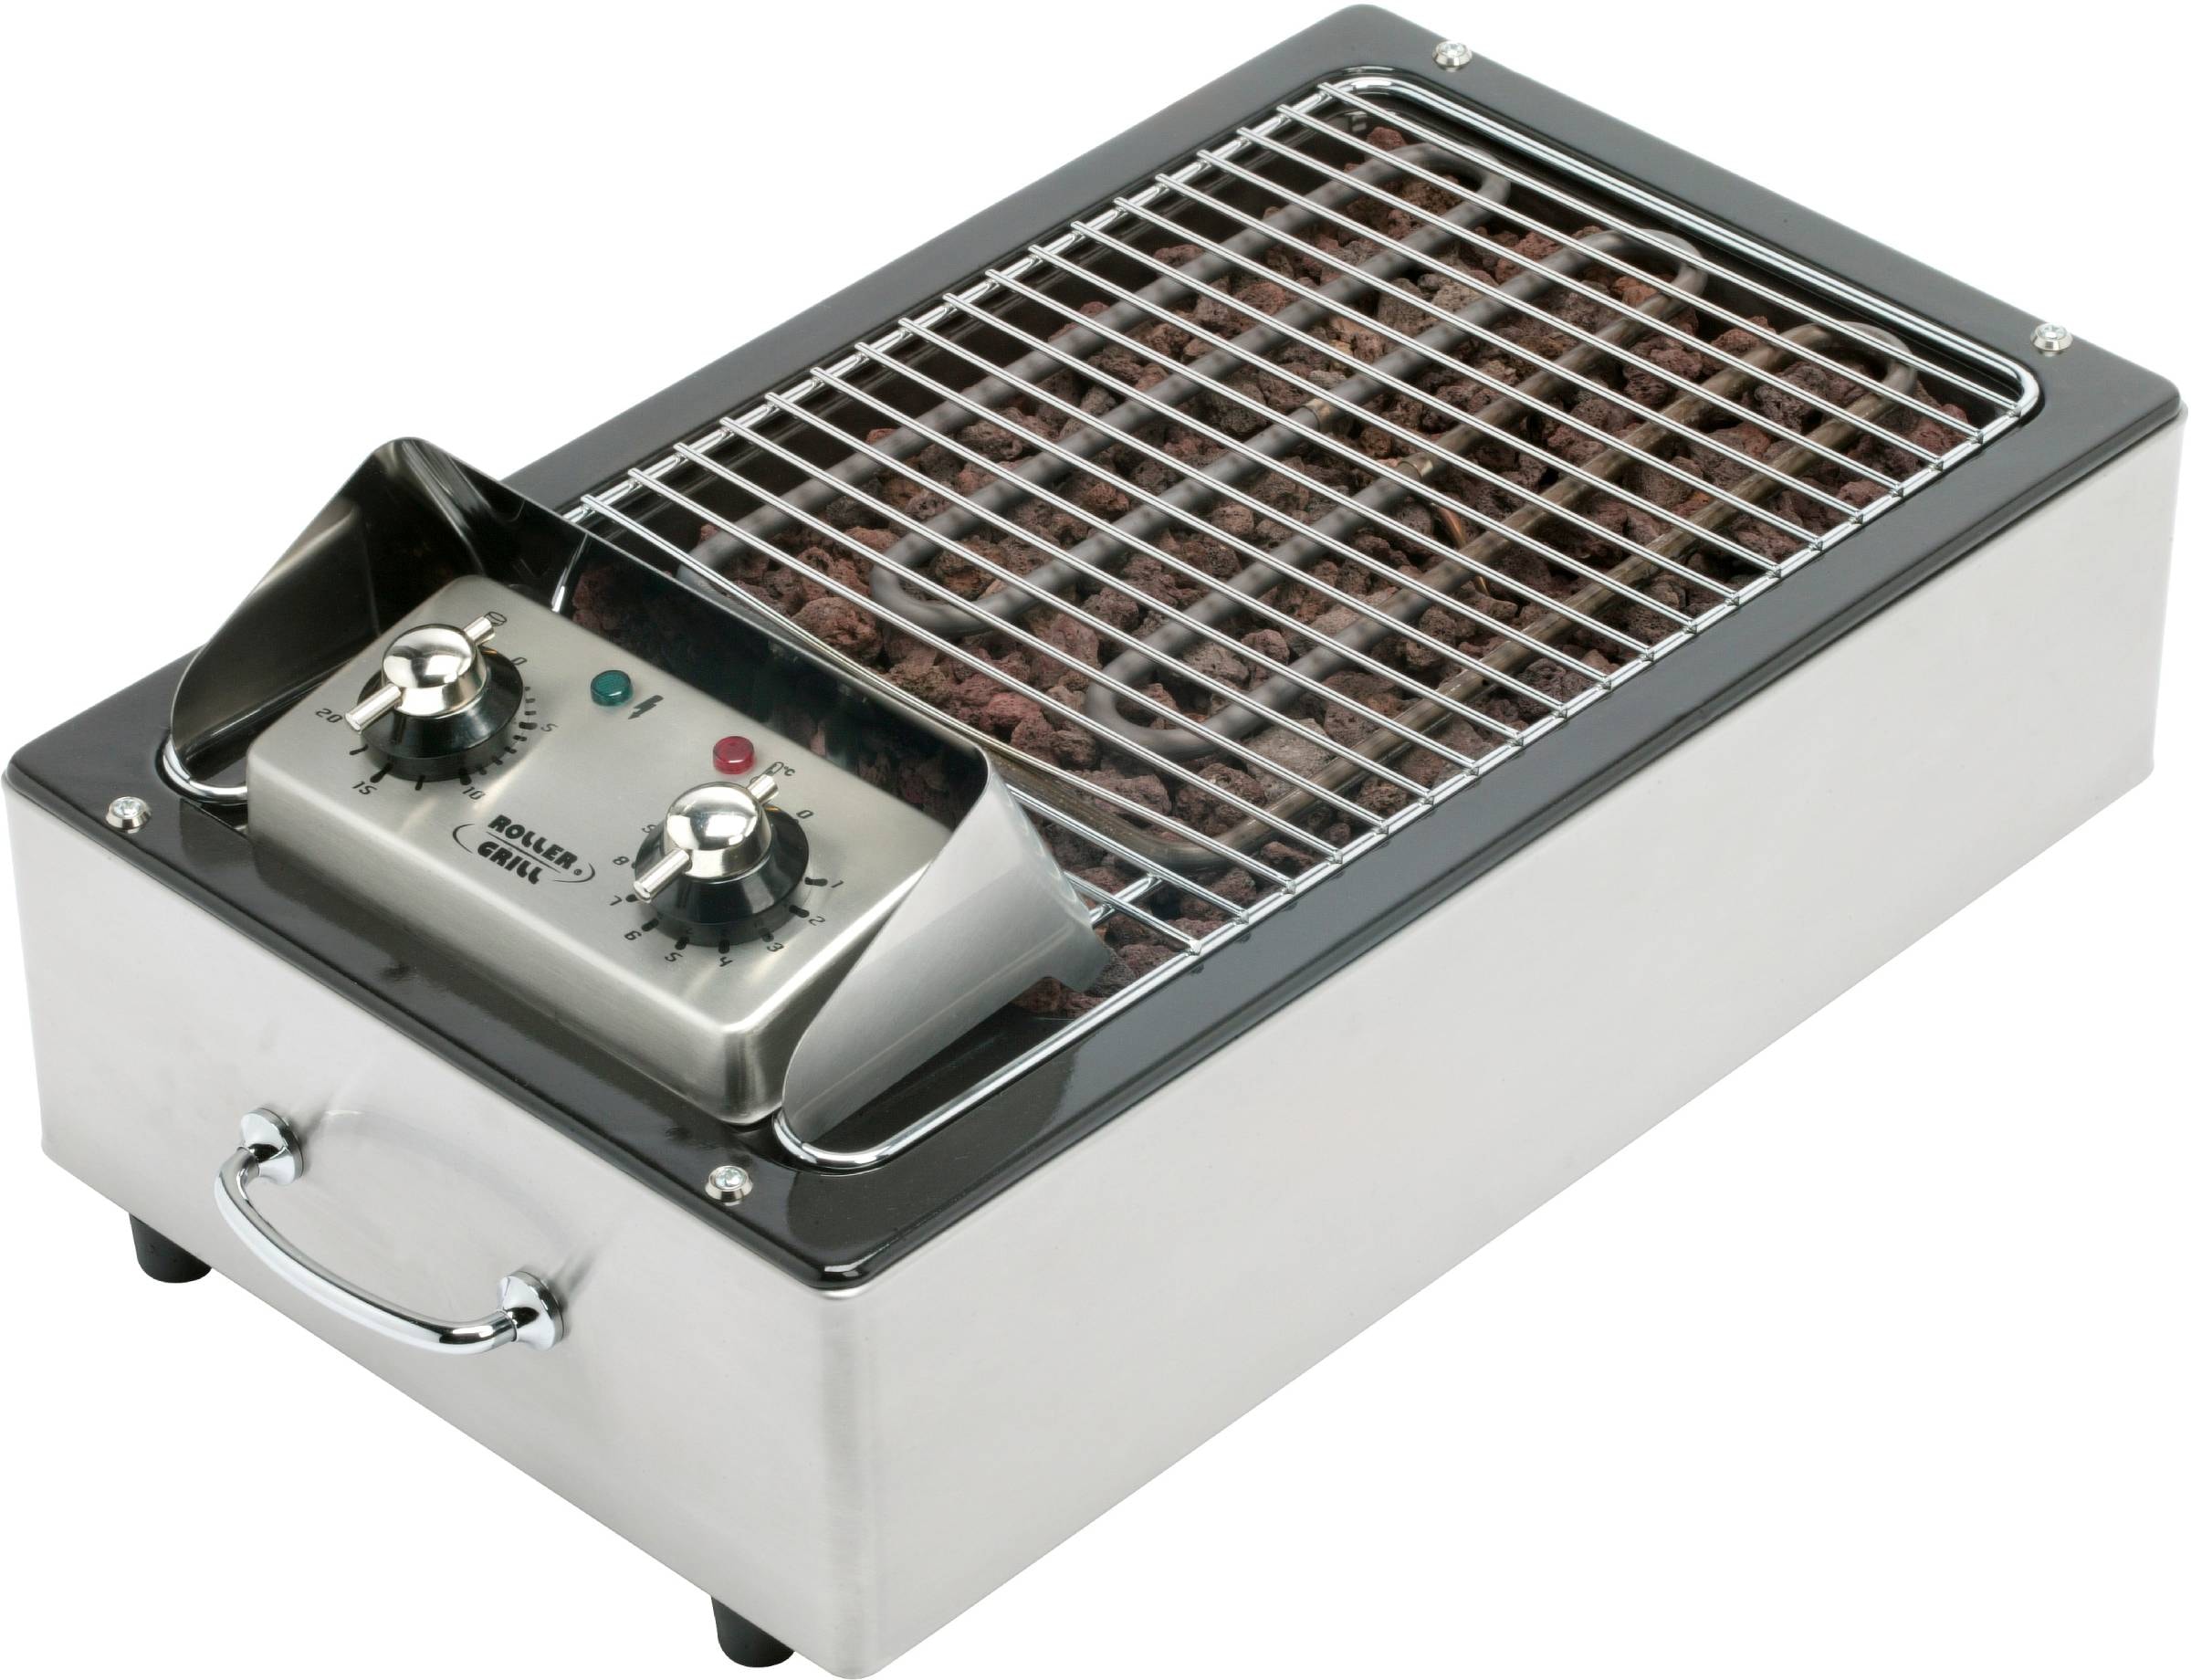 ROLLER GRILL Barbecue électrique   GRILL130I